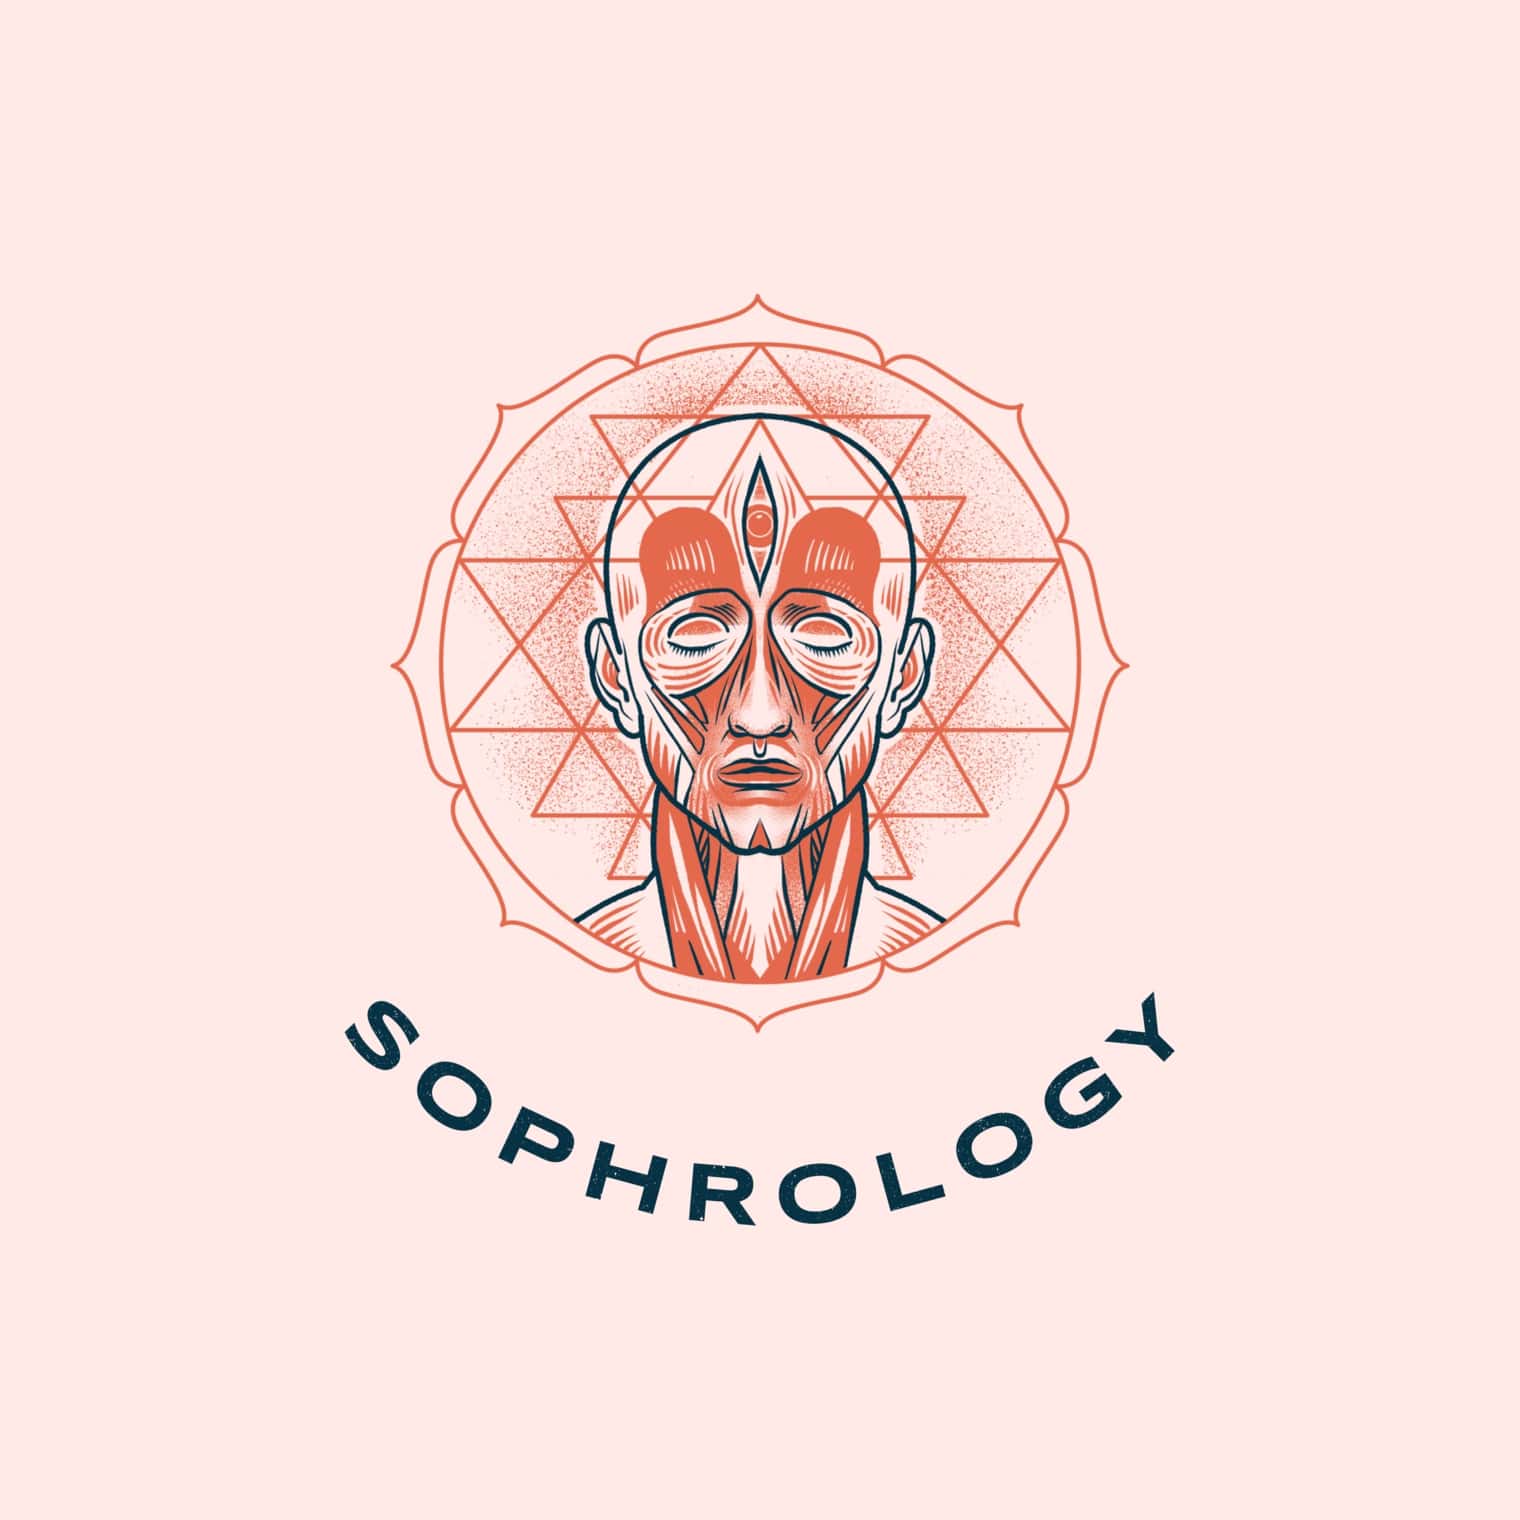 Service sophrology session by a sophrologist in Brussels in Belgium online by phone for free